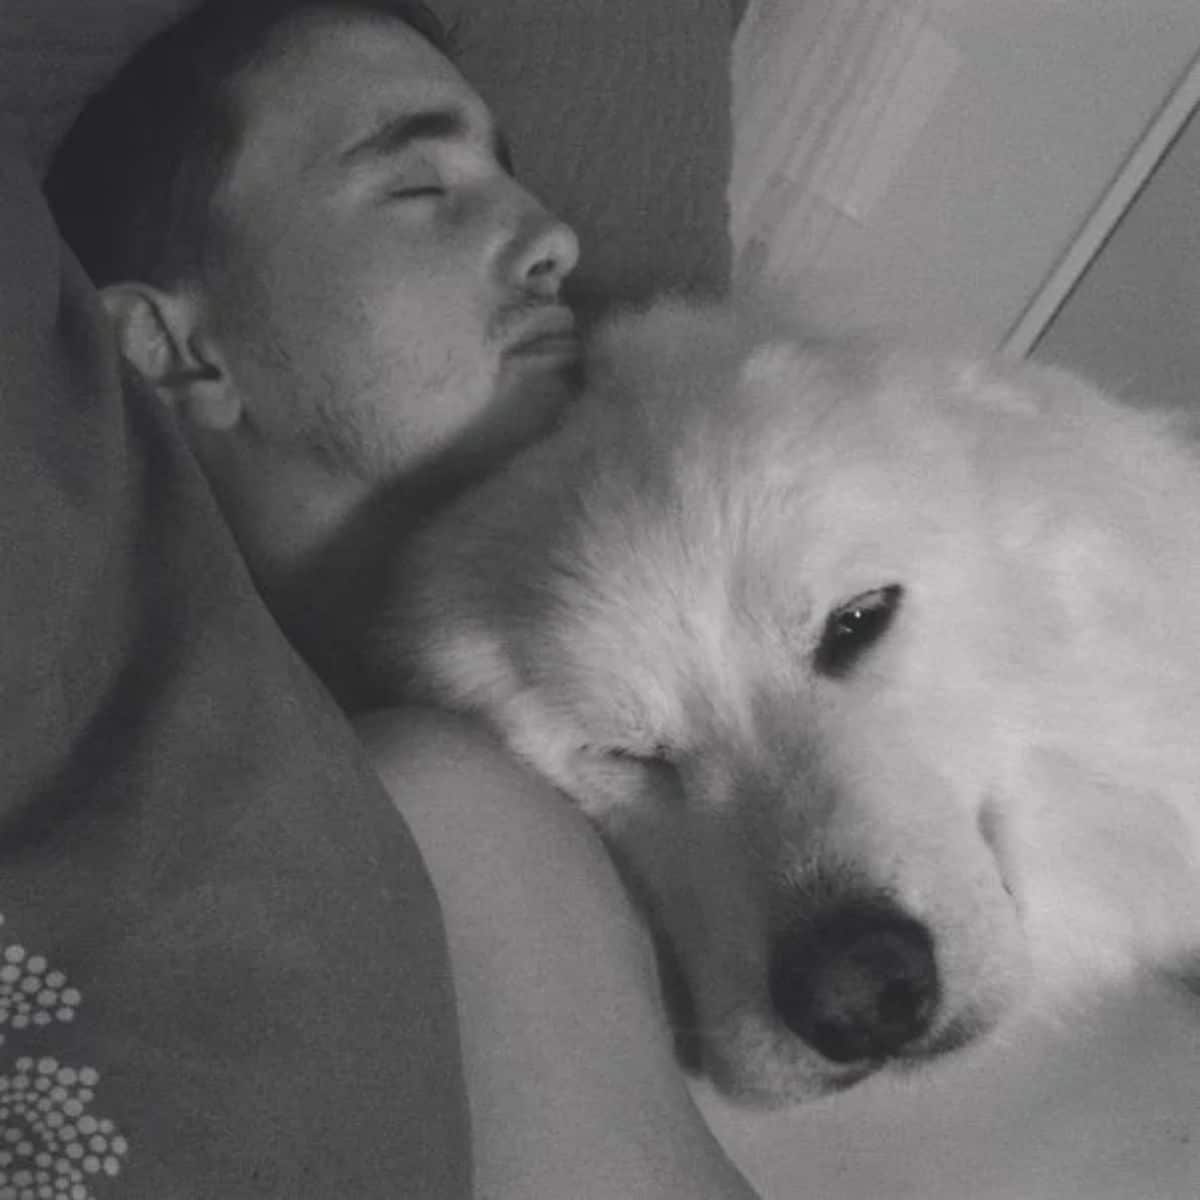 black and white photo of a white fluffy dog sleeping on a man's chest